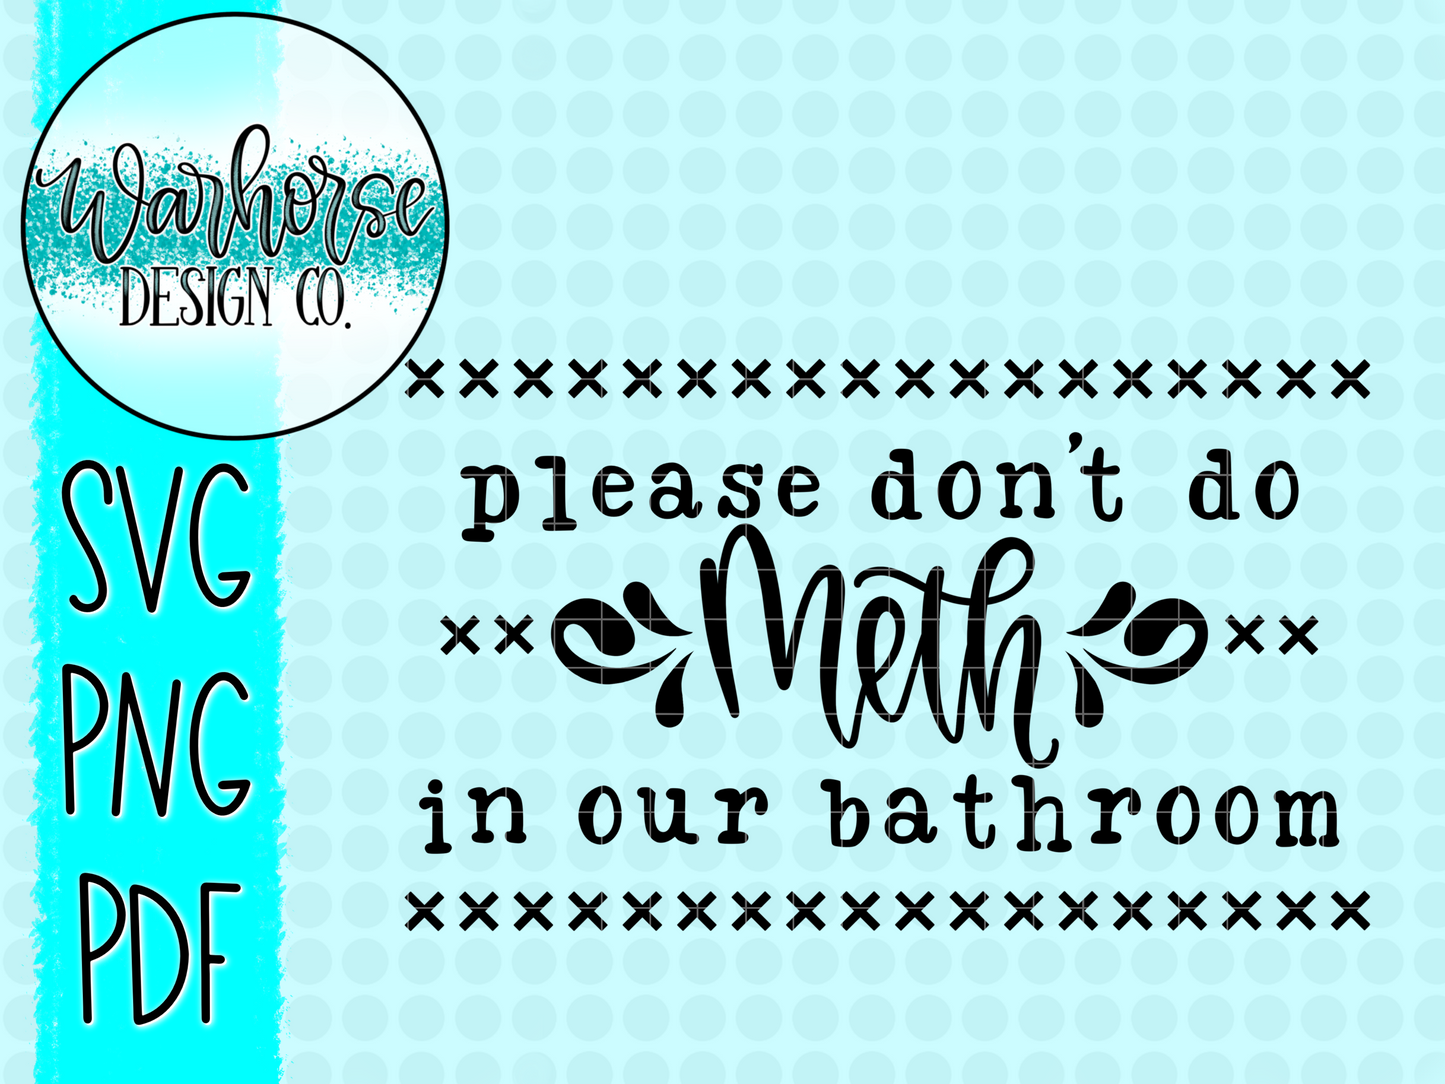 Please don't do meth in the bathroom PNG SVG PDF